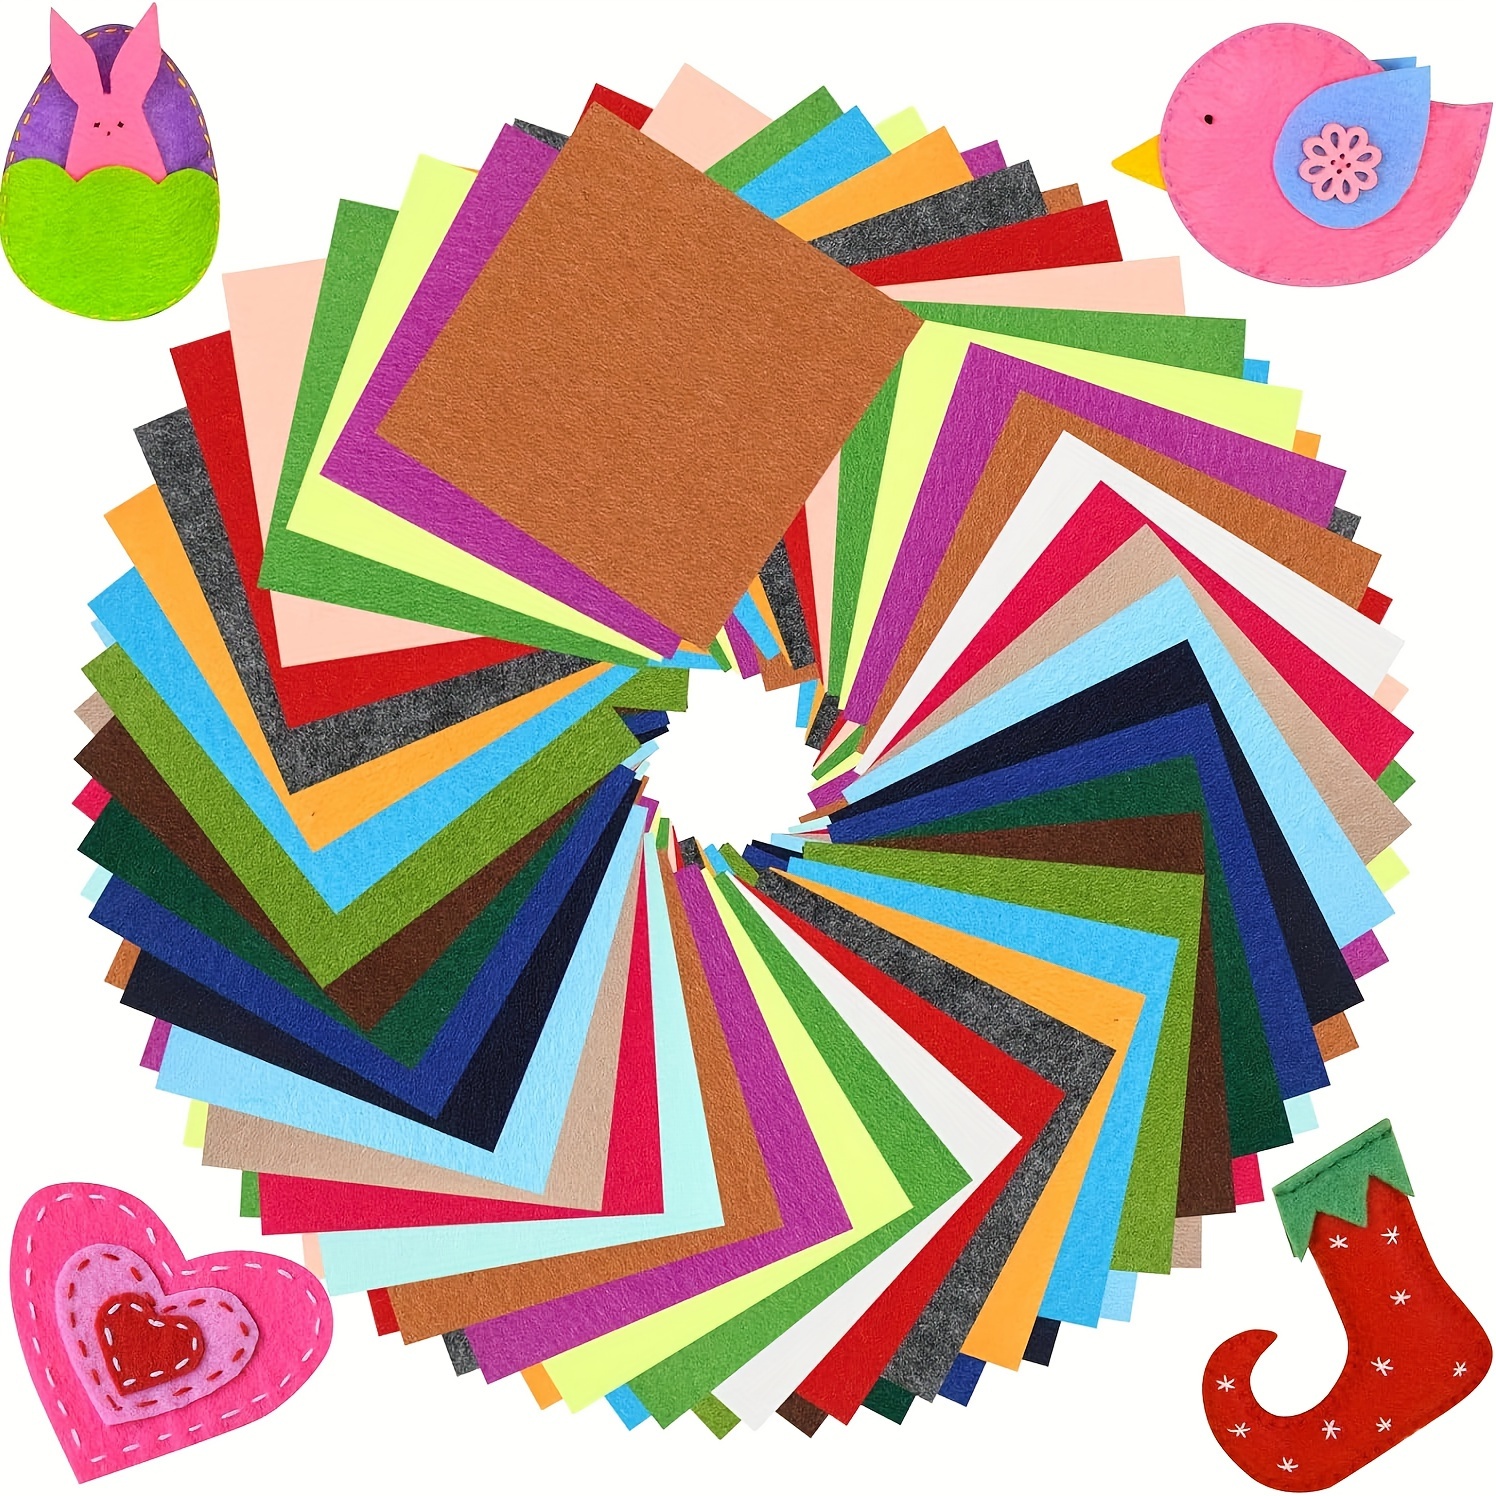 300pcs Felt Sheets 4 X 4 Inch Craft Felt Squares 1 Mm Thick Colored Felt  Fabric For DIY Sewing Projects Patchwork School, 40 Colors